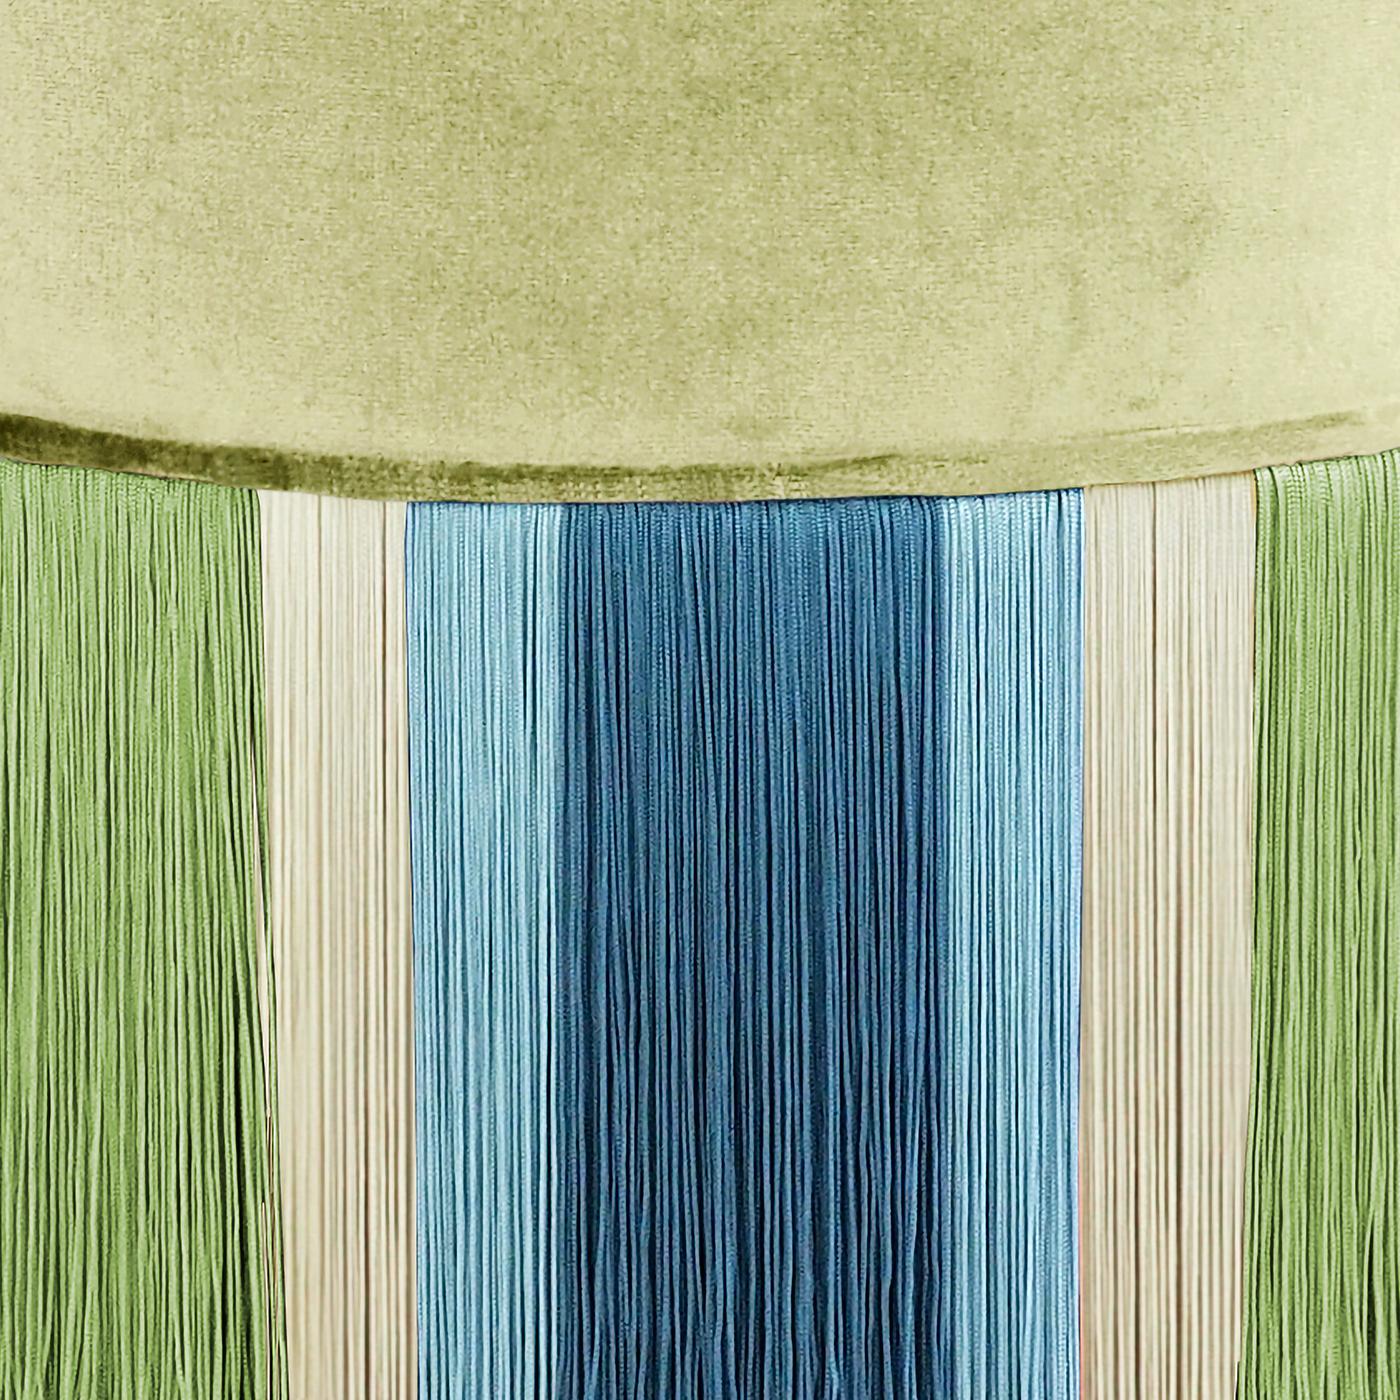 In charming peacock tones, this pouf comes from the Geometric Couture Collection, full of fun and flirty designs. On a beechwood base, the pouf is padded and upholstered in velvet then accented with viscose fringe in shades of green and blue over